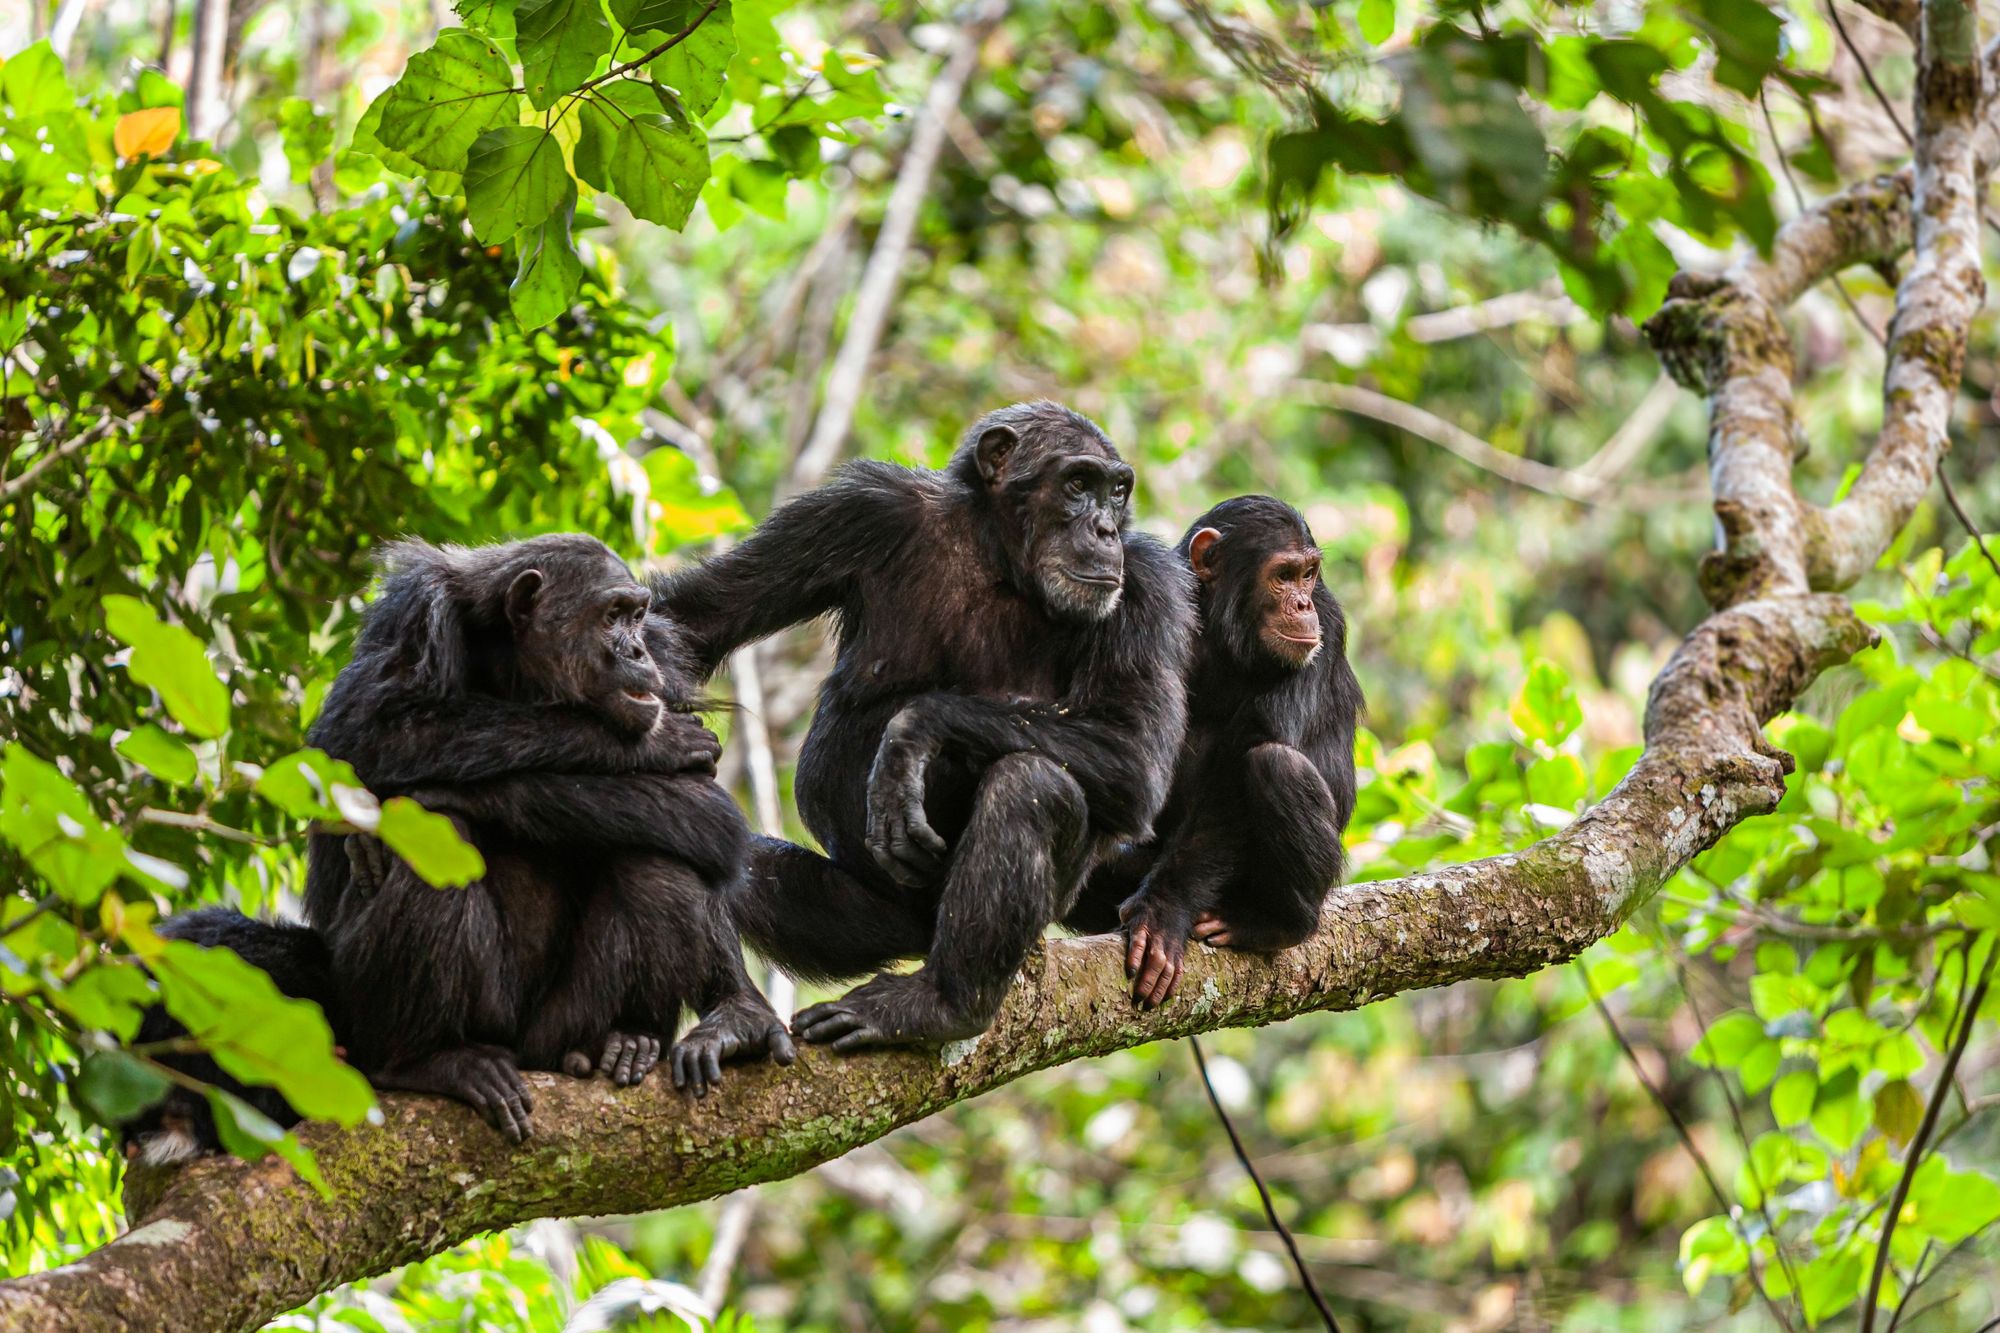 The chimpanzees of the Mahale Mountains. This is one of the best places on earth to spot these animals in the wild. Photo: Getty